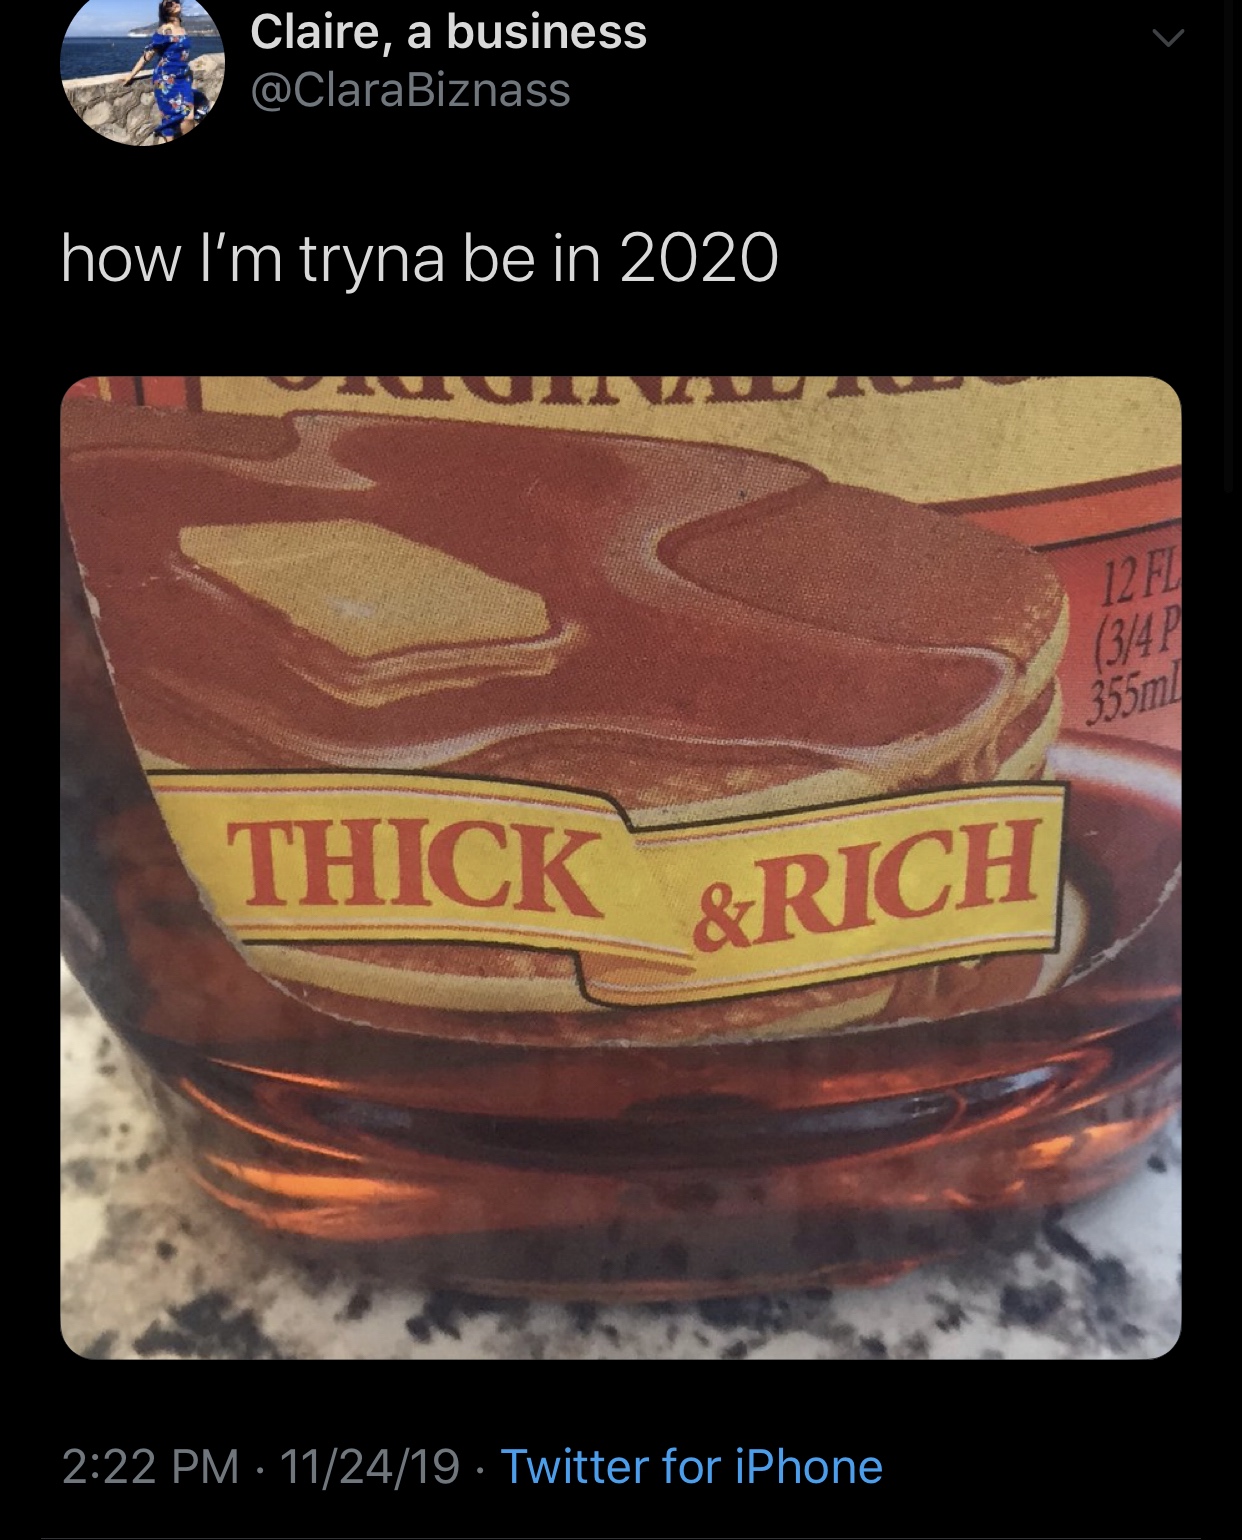 meme - orange - Claire, a business how I'm tryna be in 2020 Thick Rich 112419. Twitter for iPhone